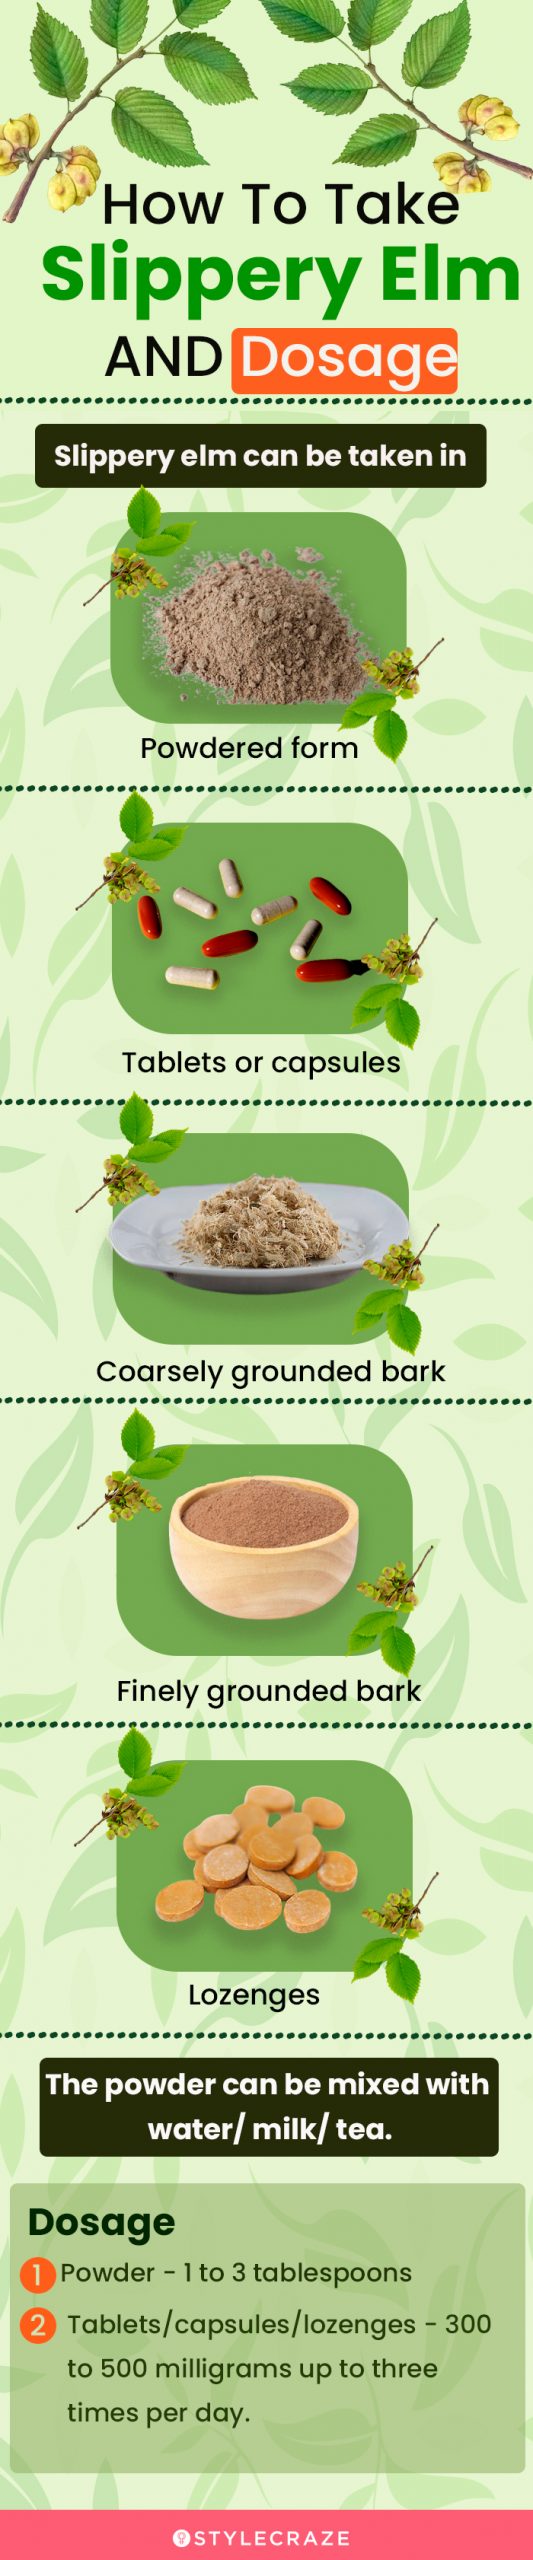 how to take slippery elm and dosage [infographic]